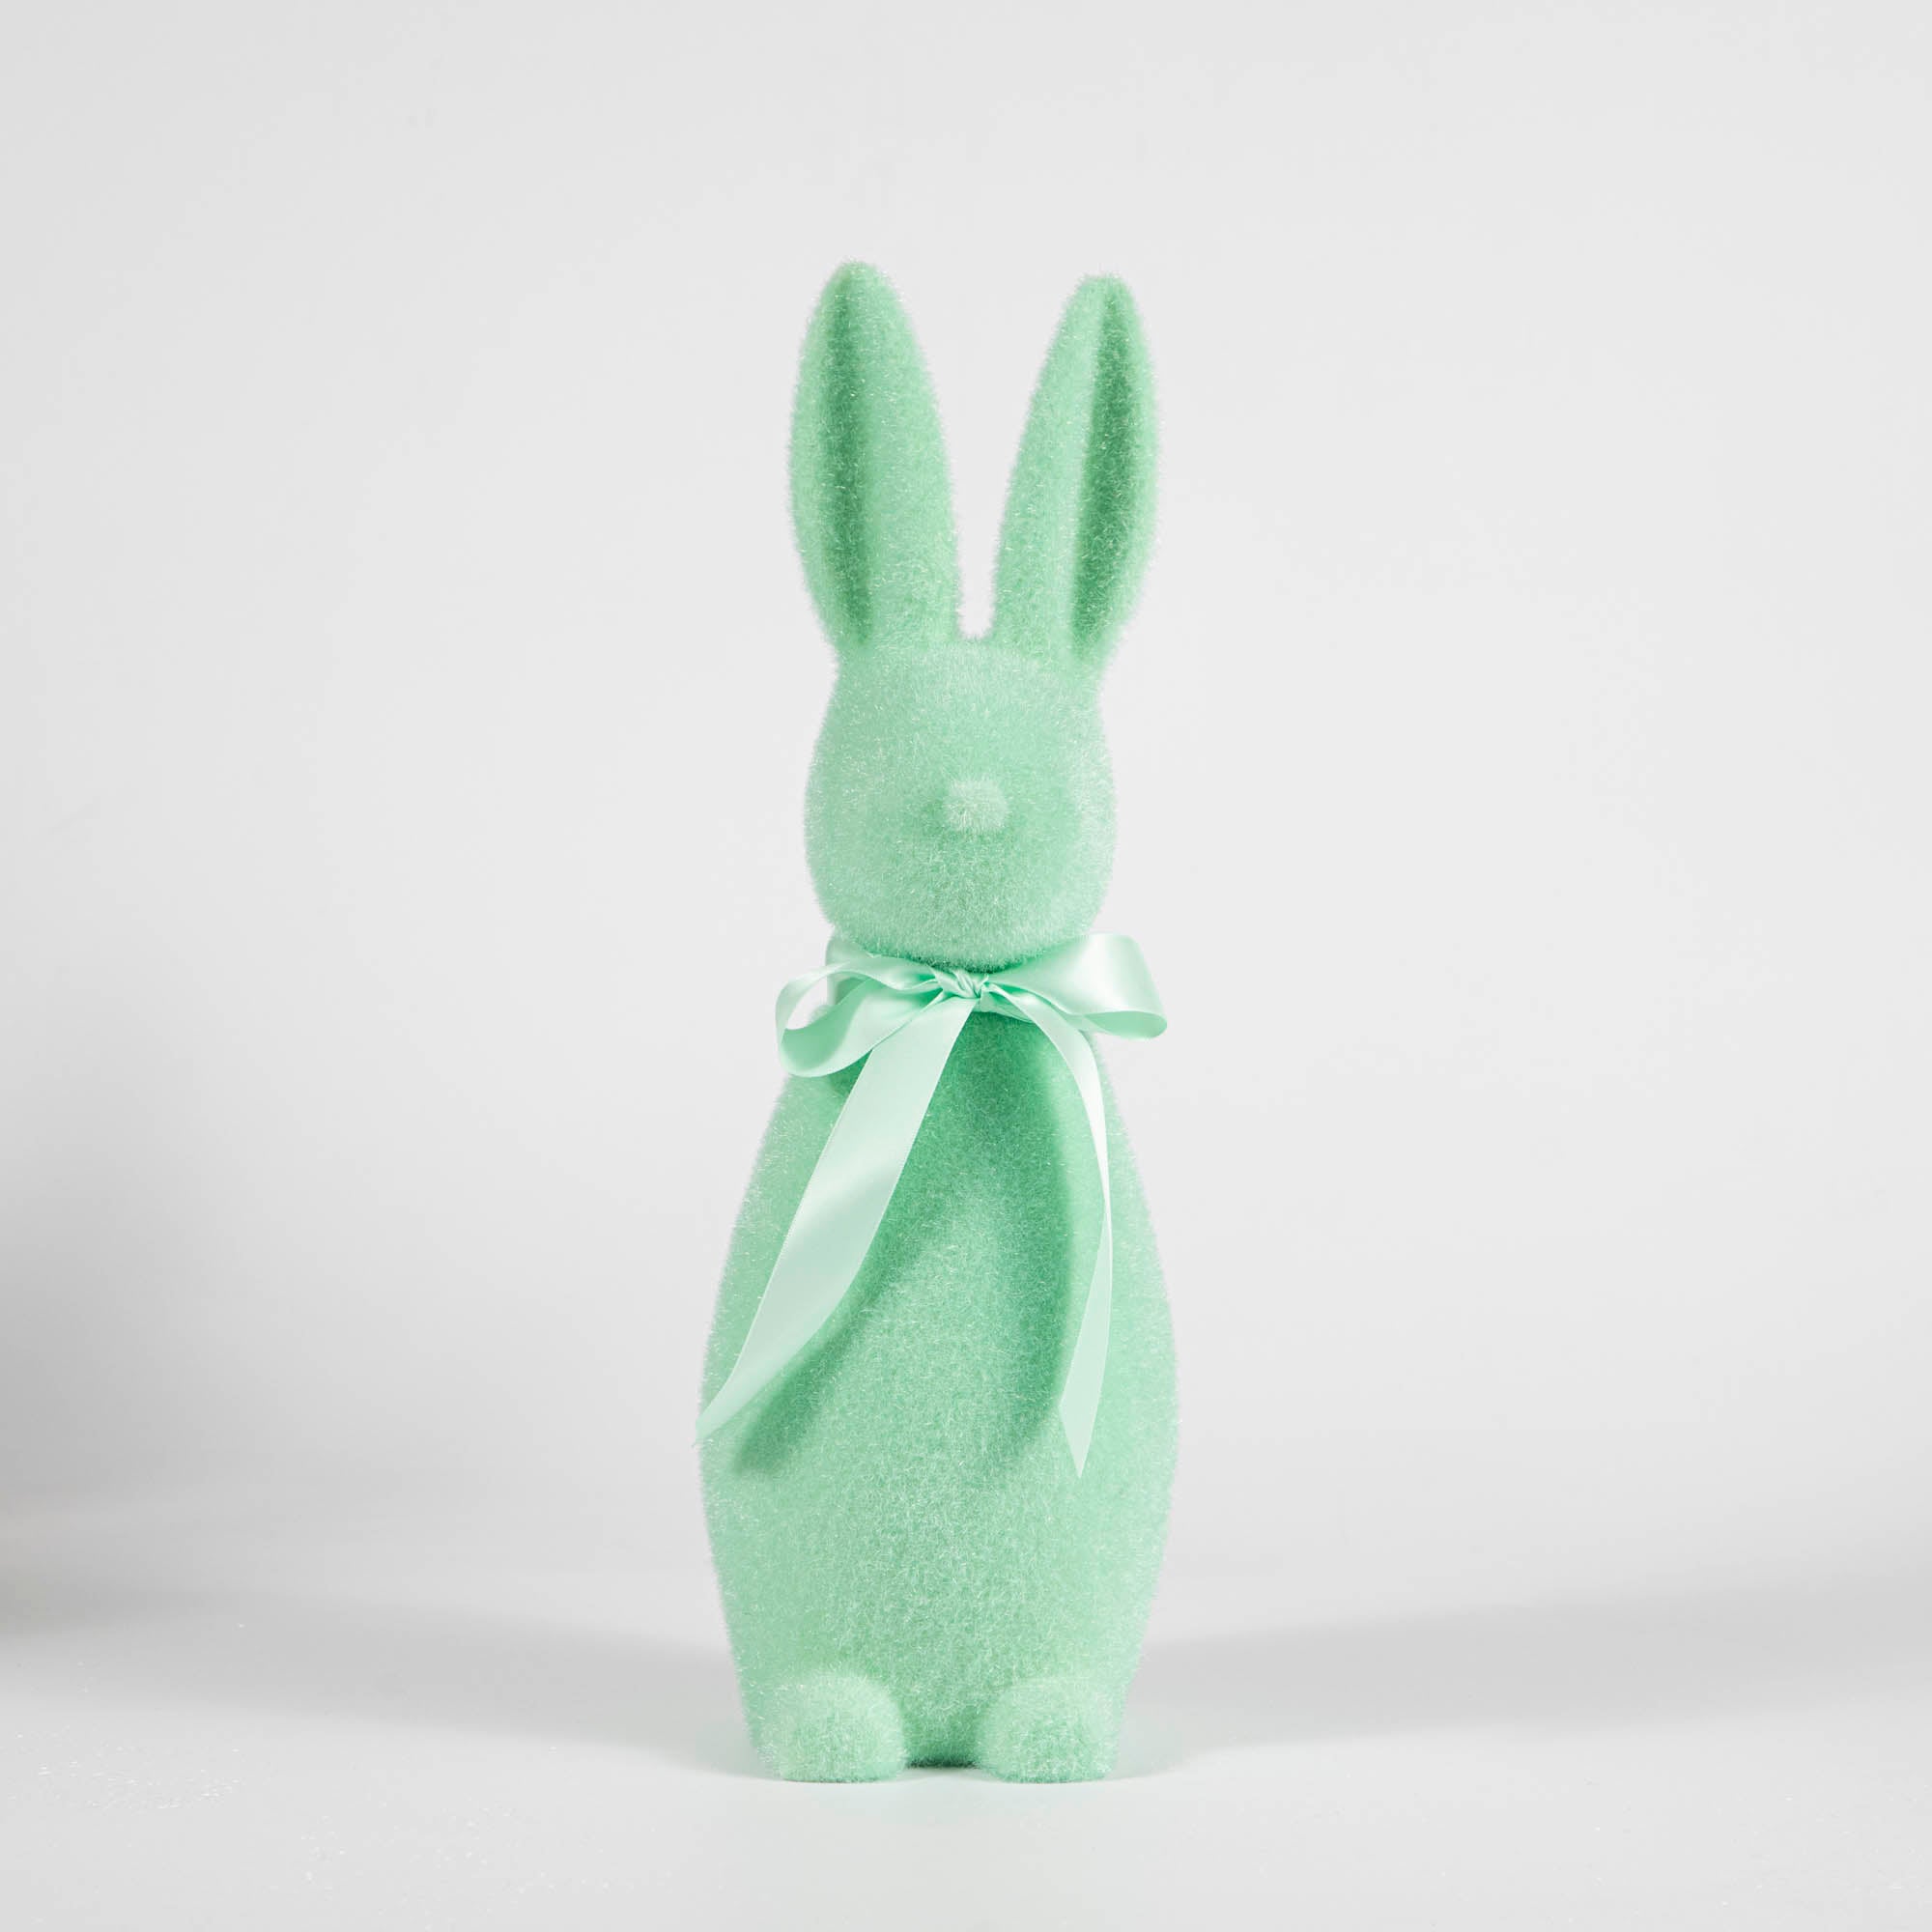 A Medium Flocked Pastel Button Nose Bunny by Glitterville, perfect for Easter and spring decorations, stands out on a white background.